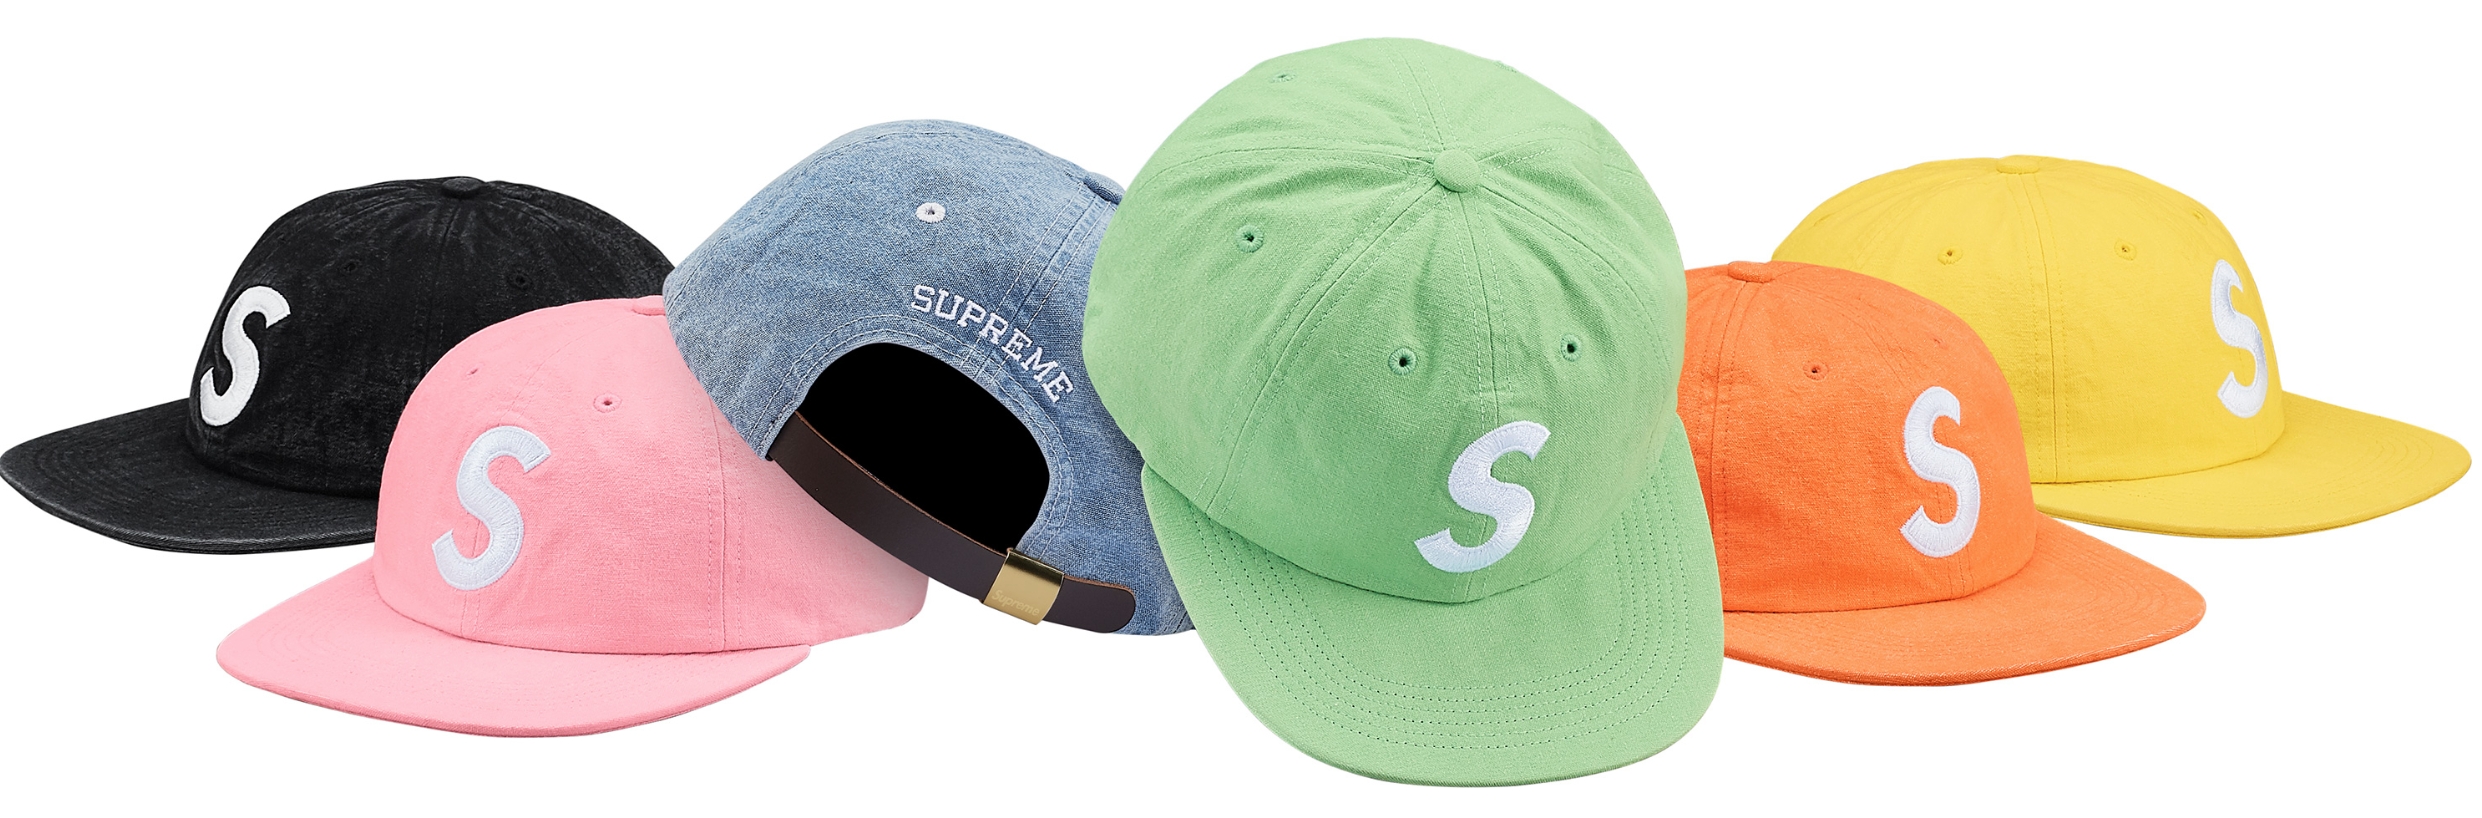 SUPREME HATS- QUALITY, THOUGHTS, AND BIG HEAD REVIEW! 